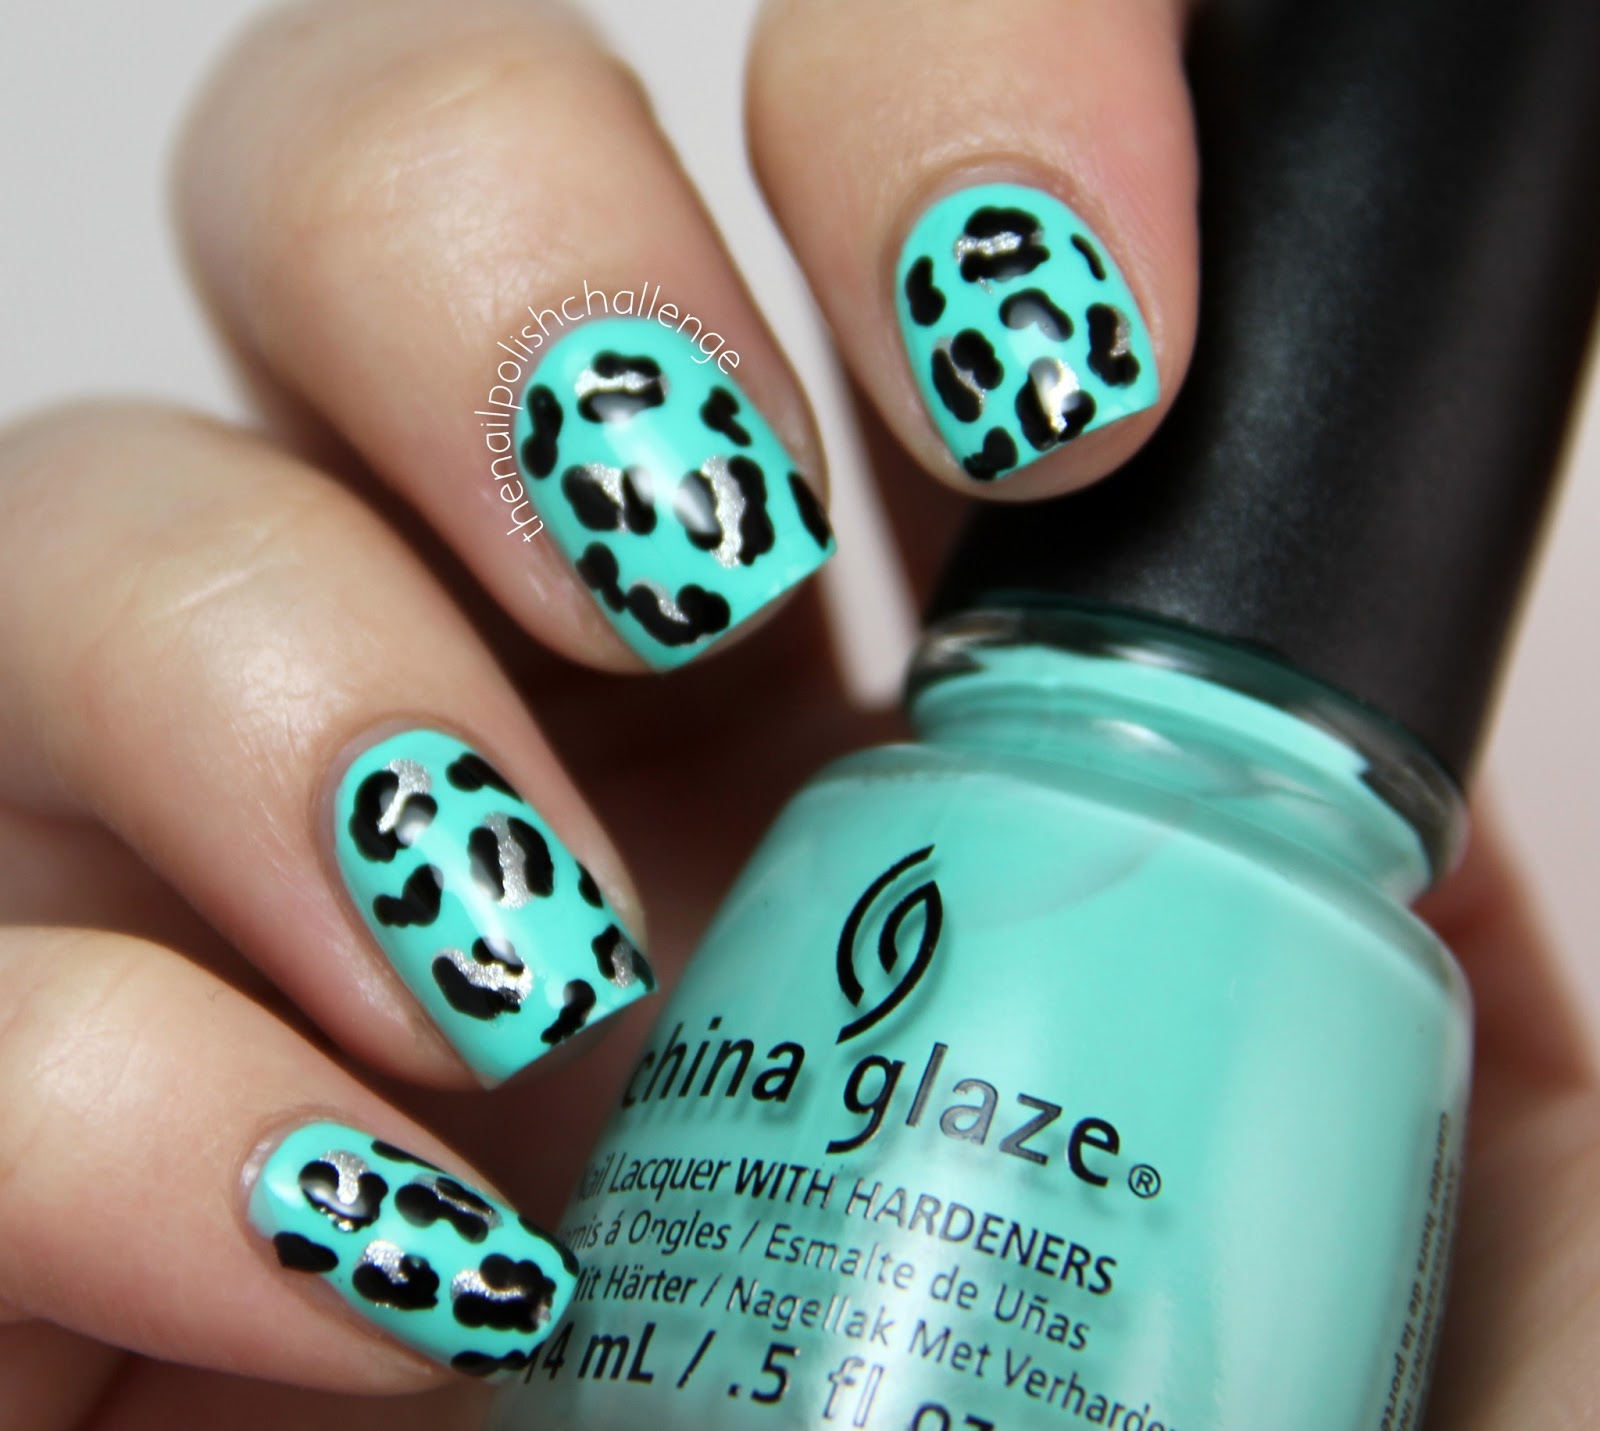 Manicure Monday - Leopard Print Nail Art! | See the World in PINK